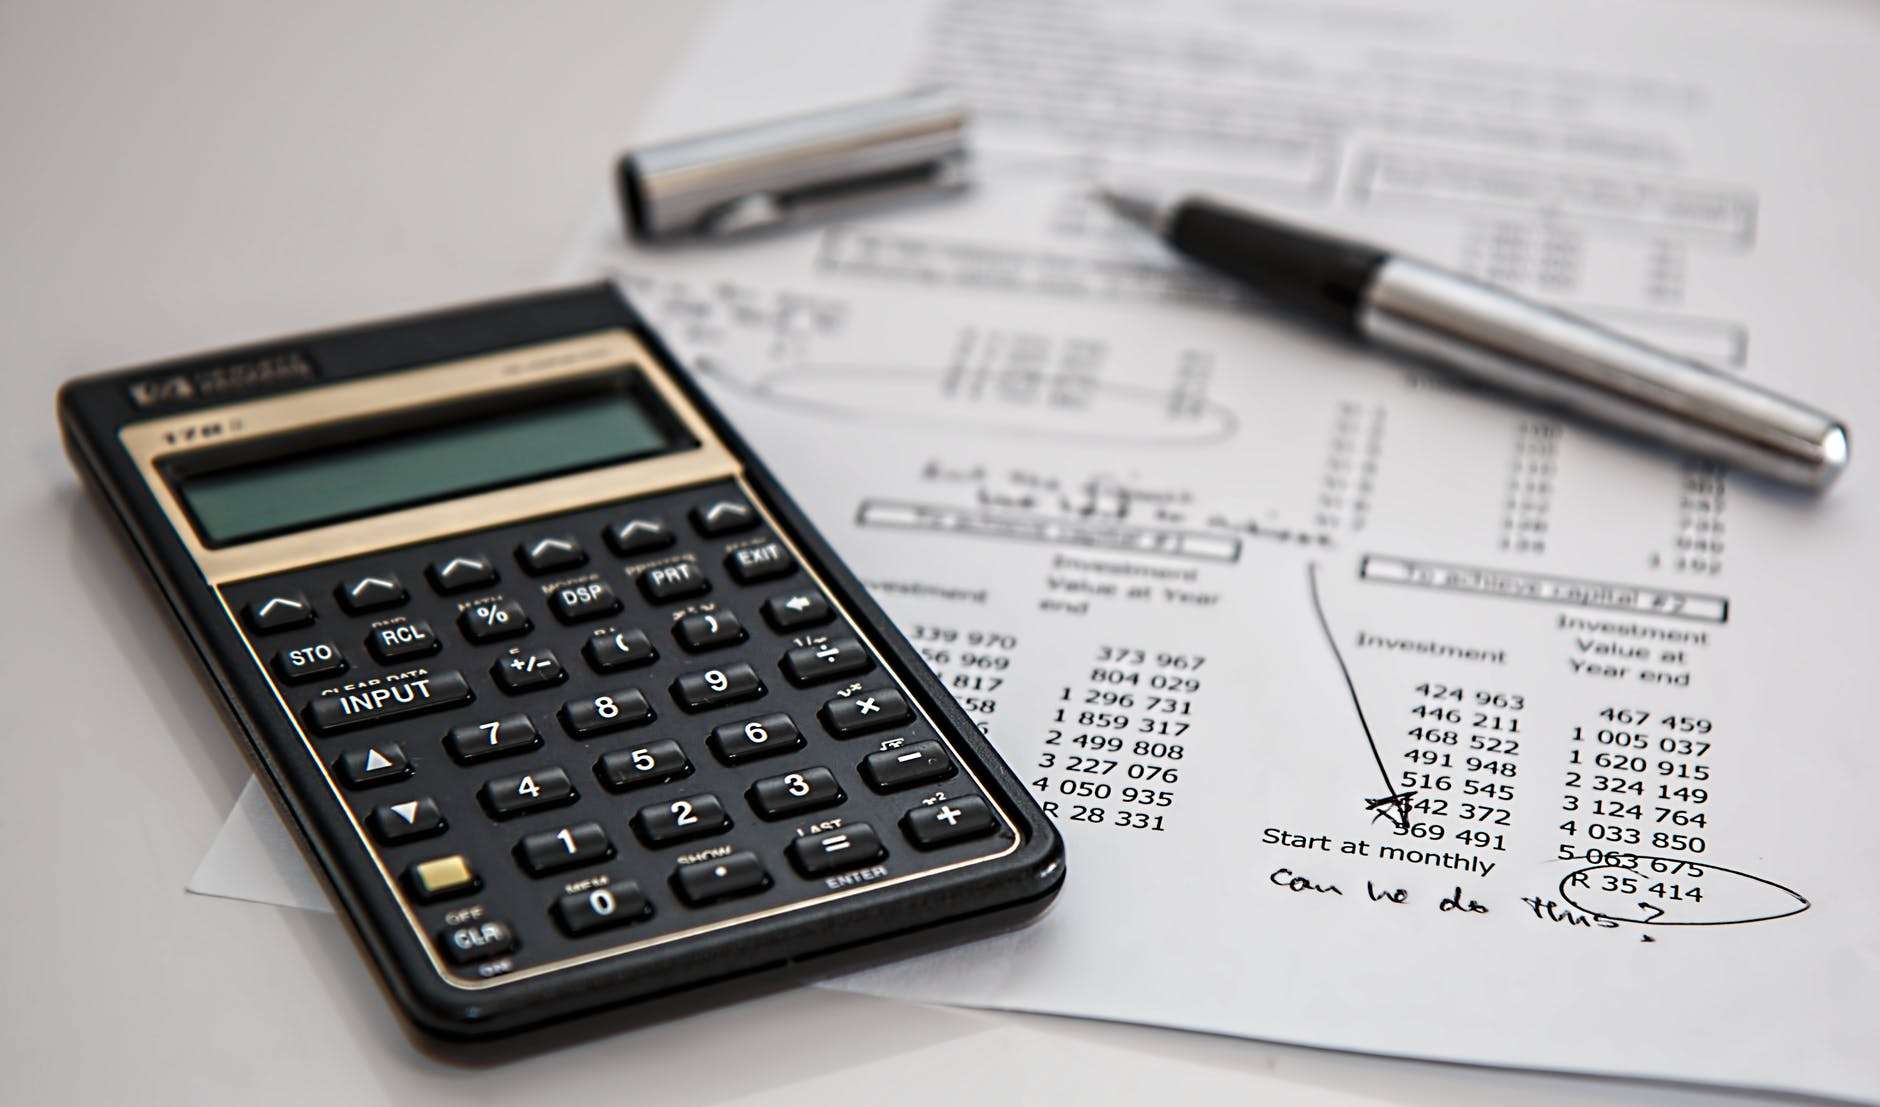 What Are the Uses of Cost Accounting Information?